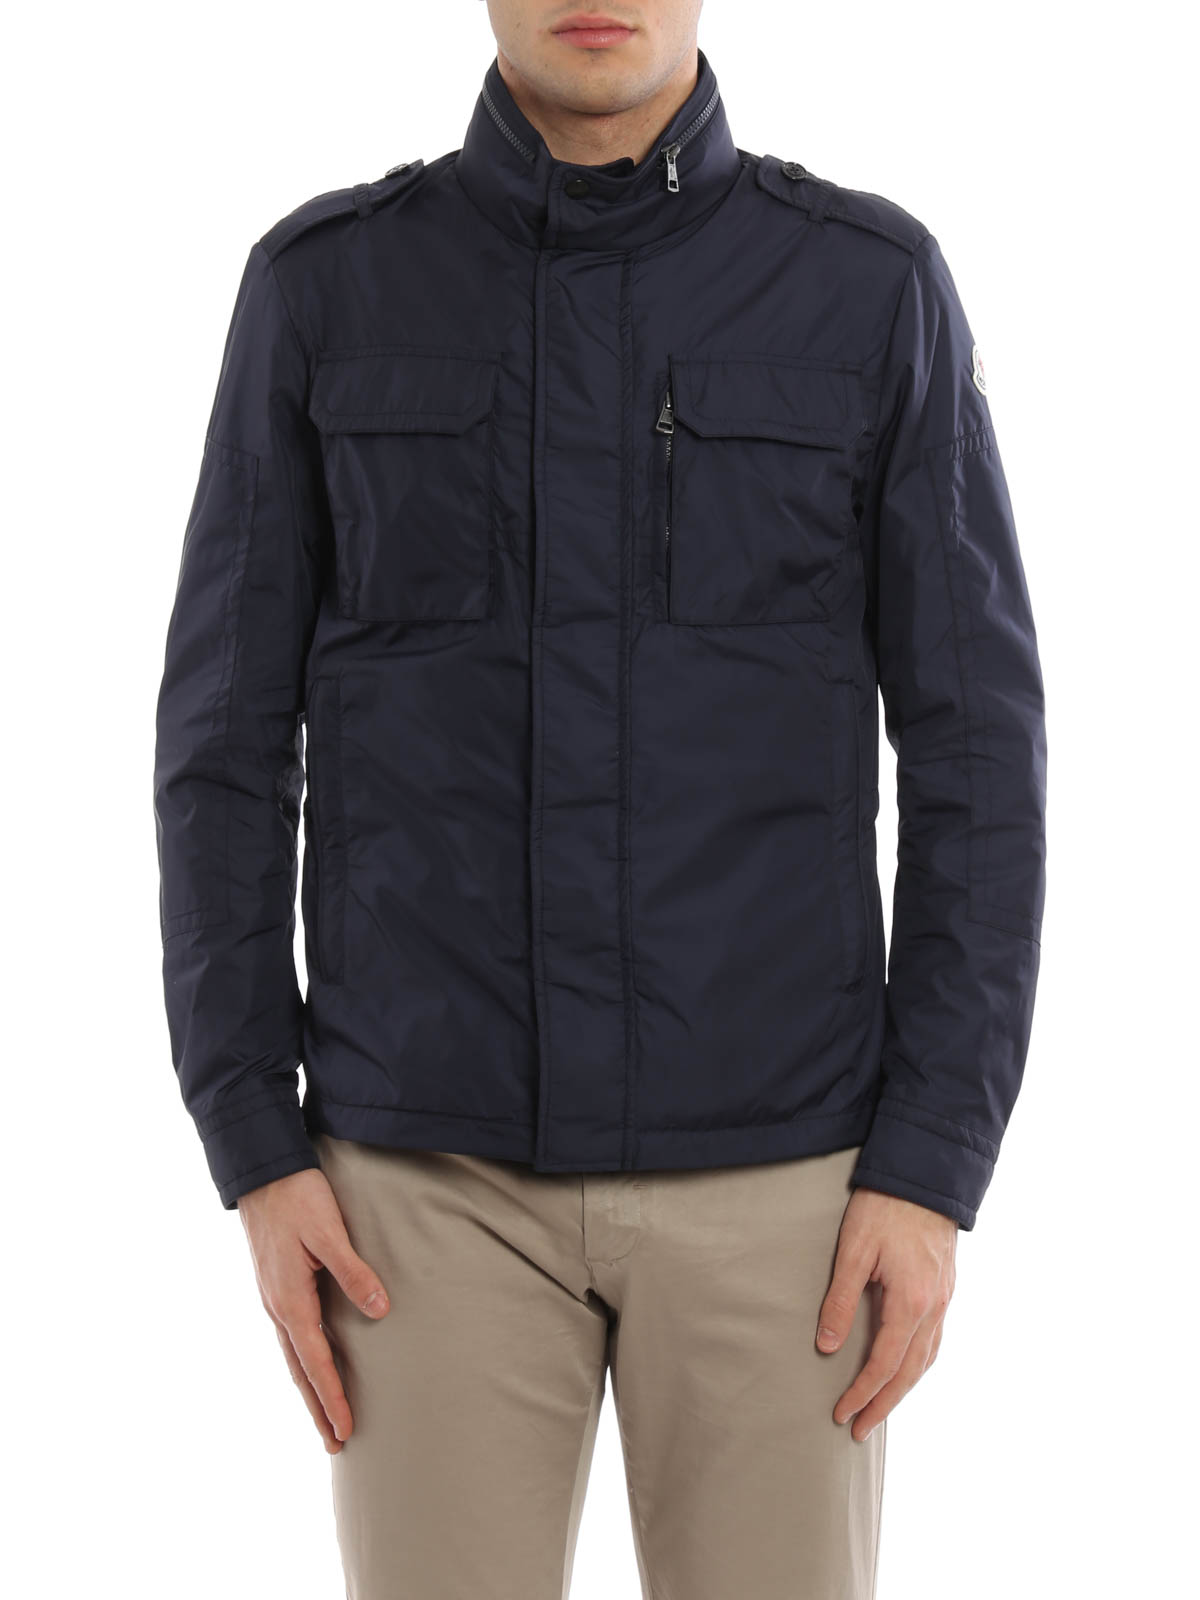 water resistant jacket - casual jackets 